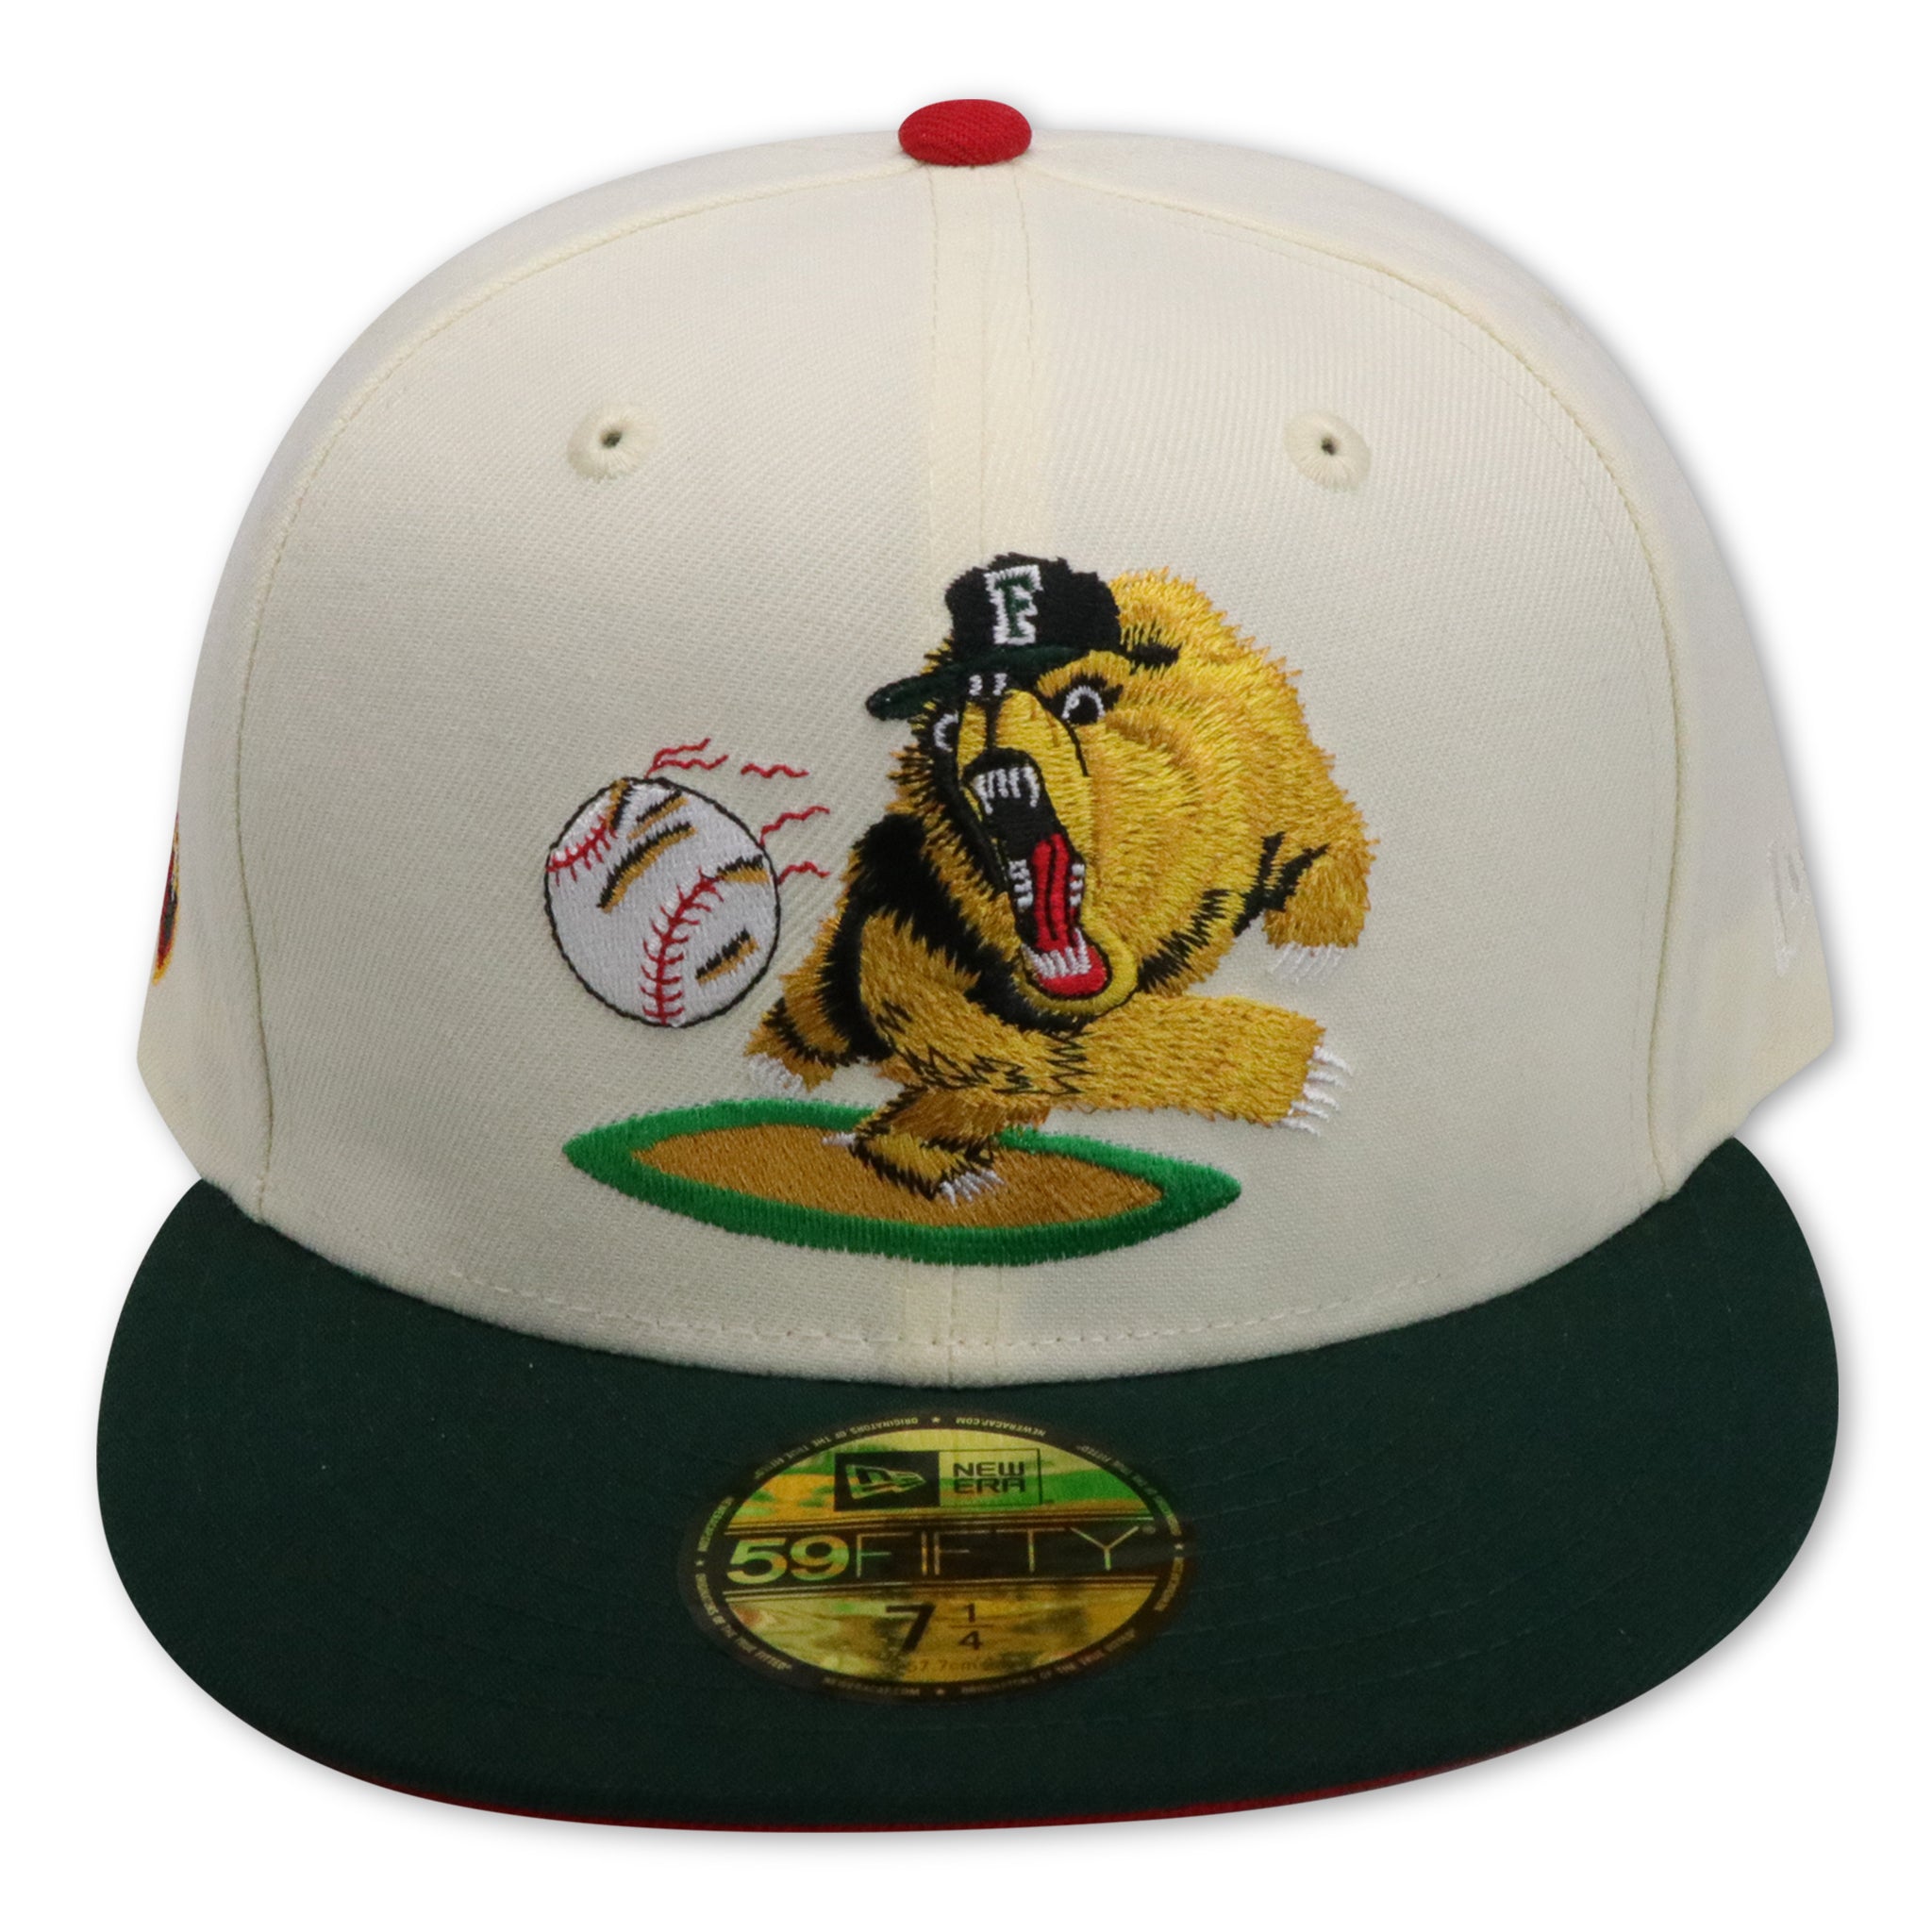 FRESNO GRIZZLIES (2-TONE) NEW ERA 59FIFTY FITTED (RED UNDER VISOR)